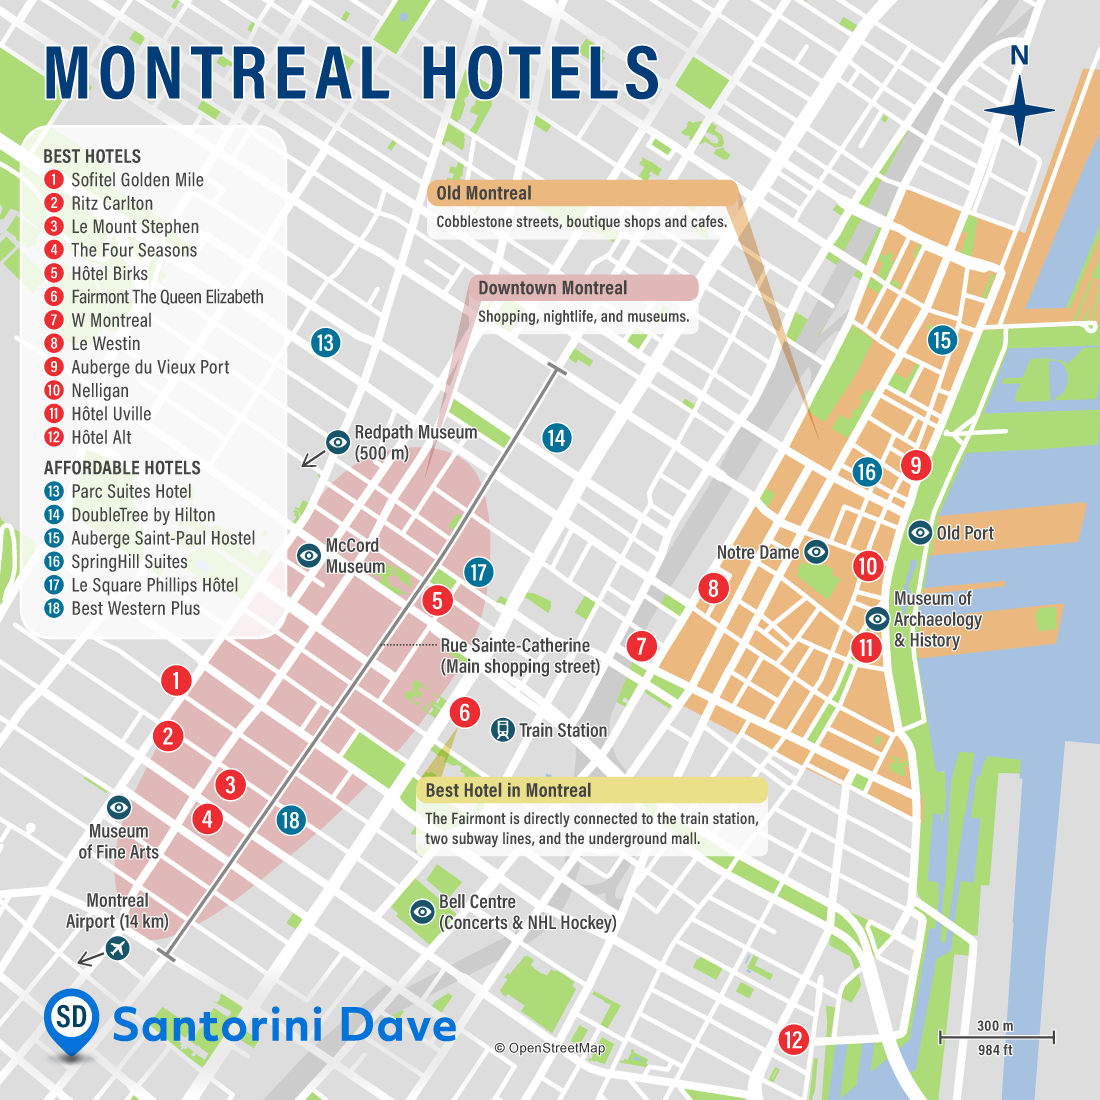 Map of Best Hotels and Neighborhoods in Montreal, Canada.